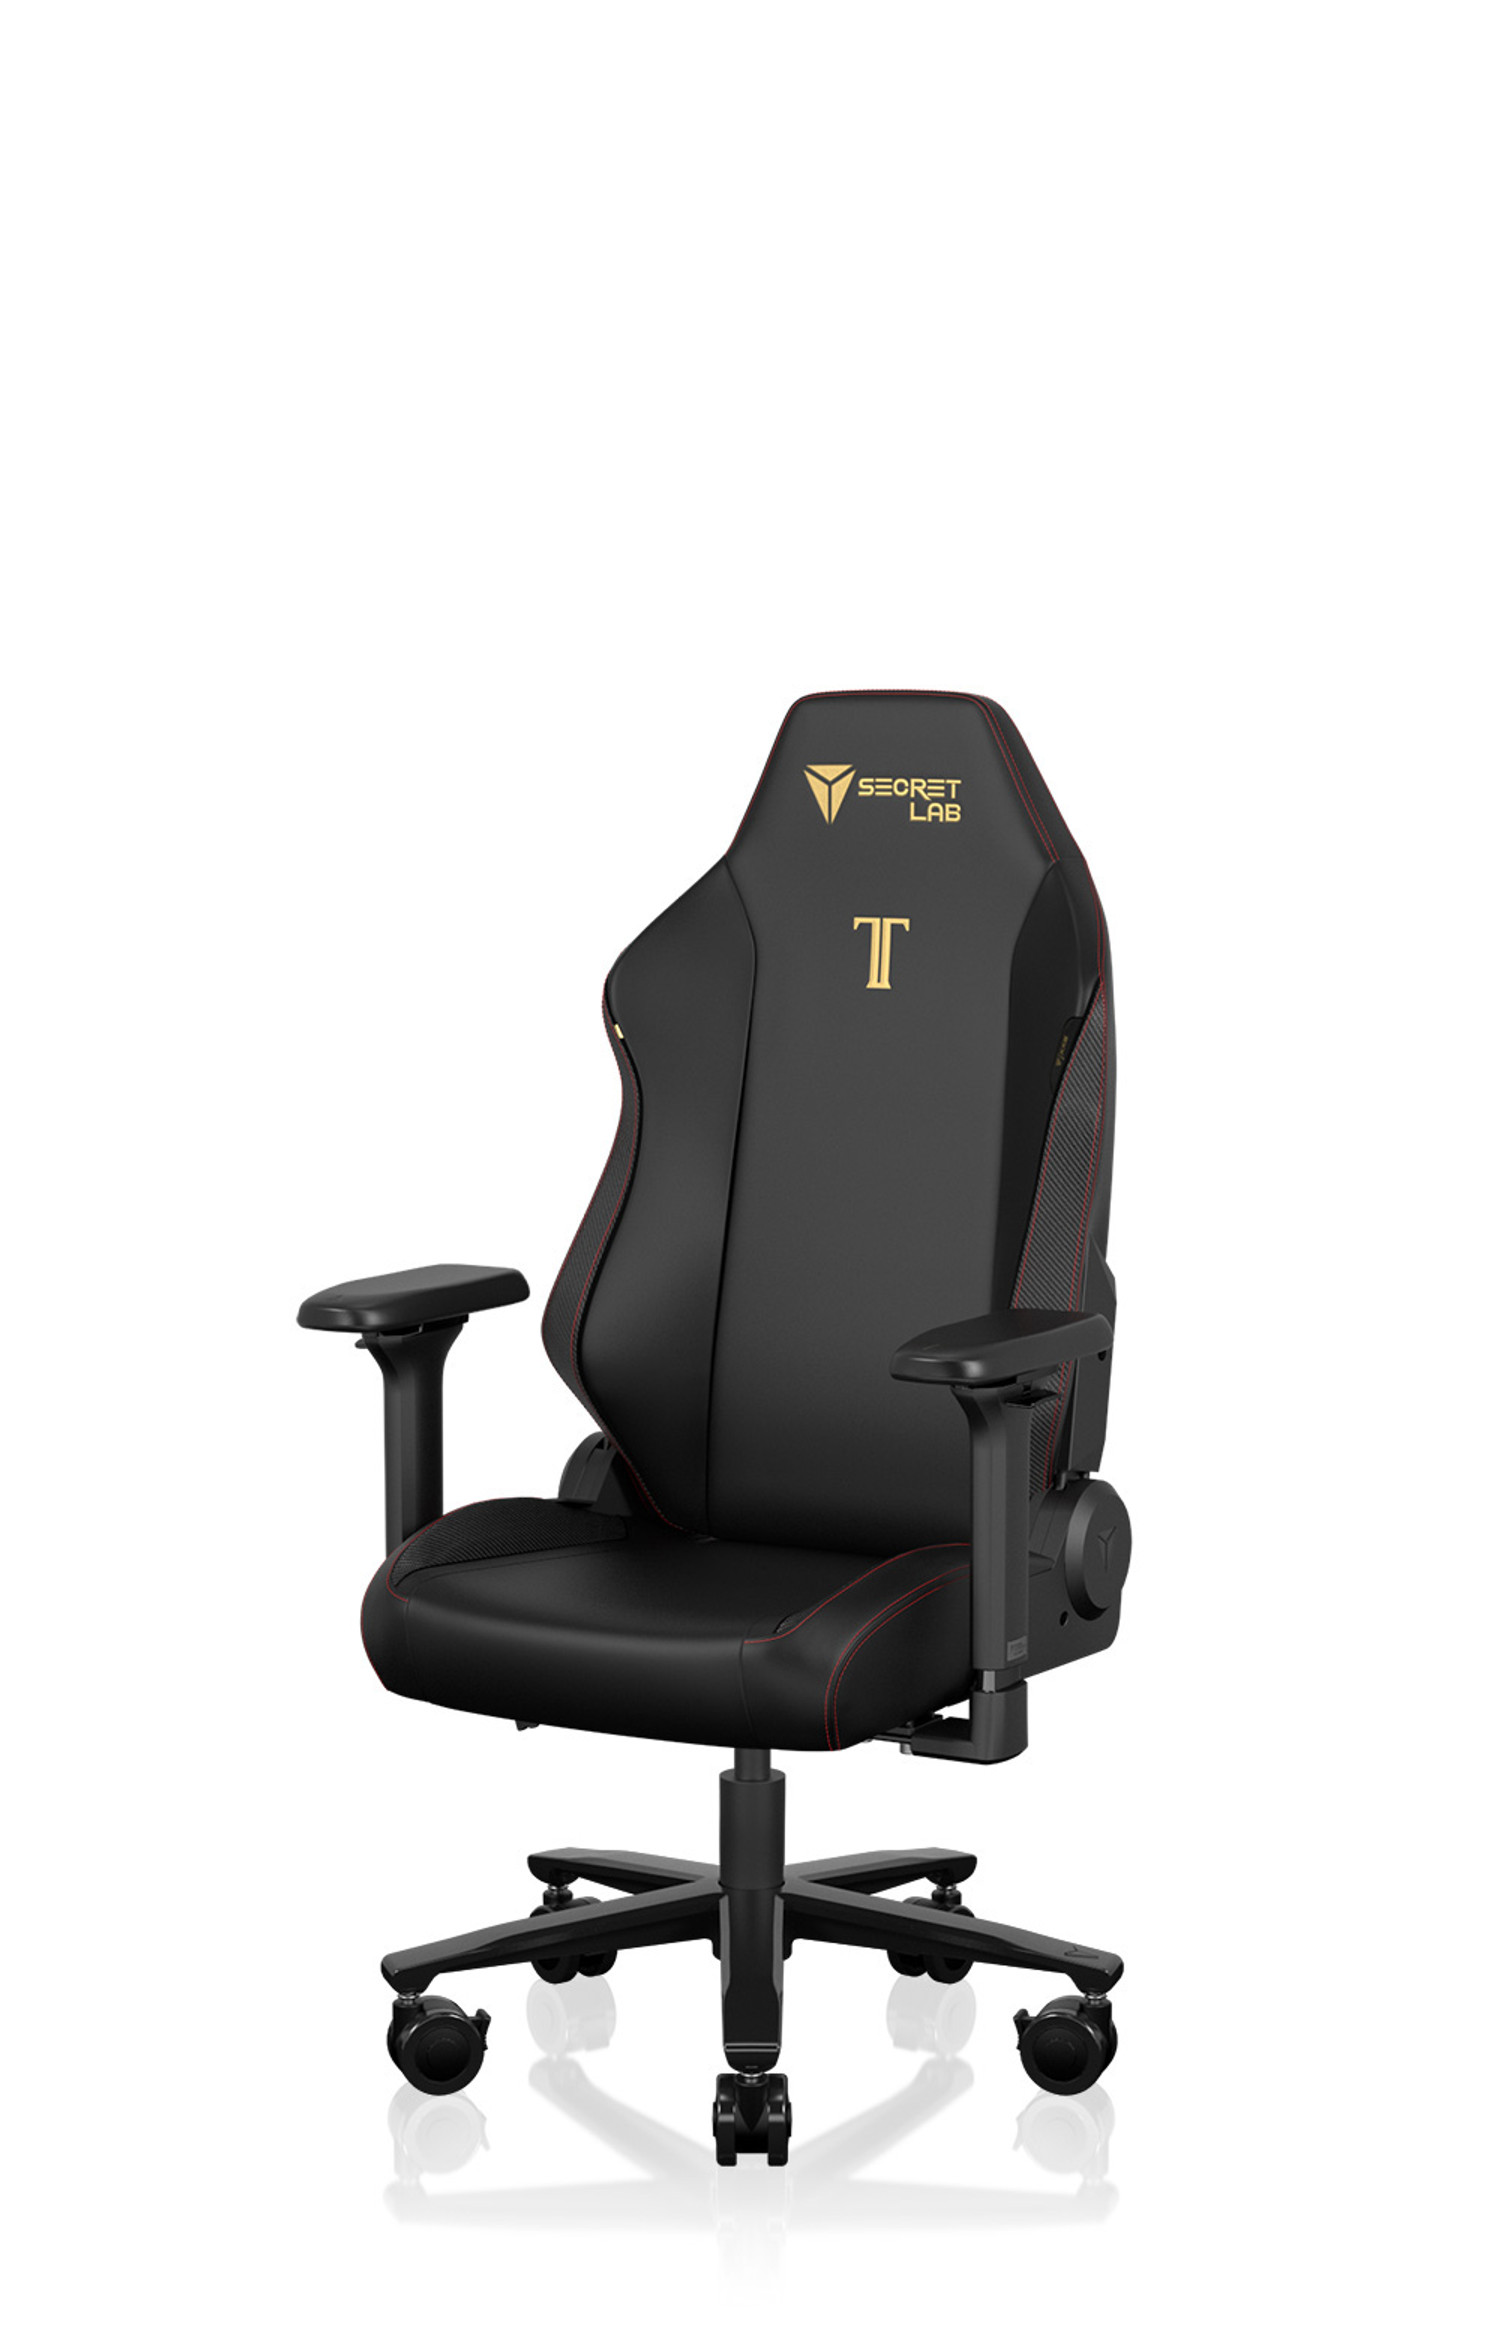 The best gaming chair collection | Secretlab EU